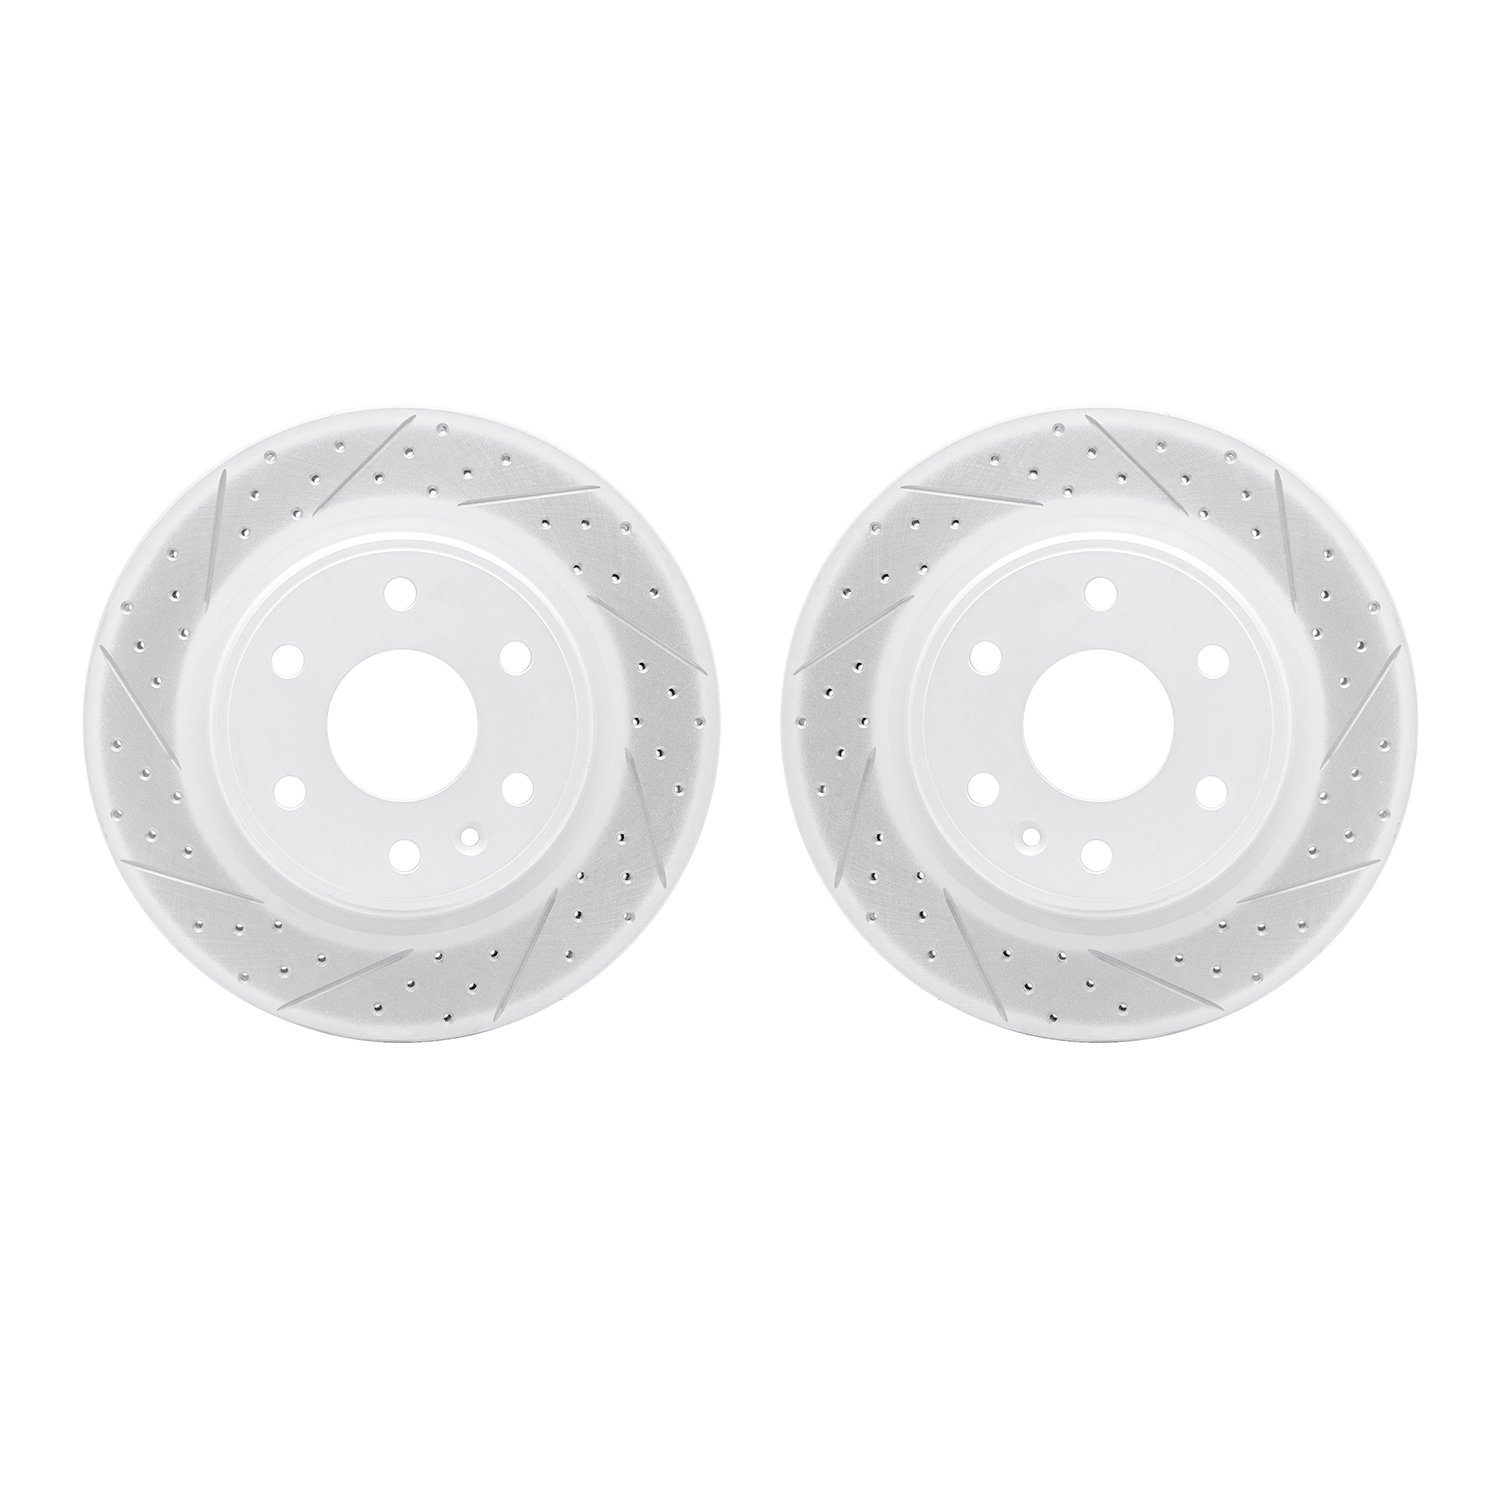 2002-48000 Geoperformance Drilled/Slotted Brake Rotors, 2007-2017 GM, Position: Front